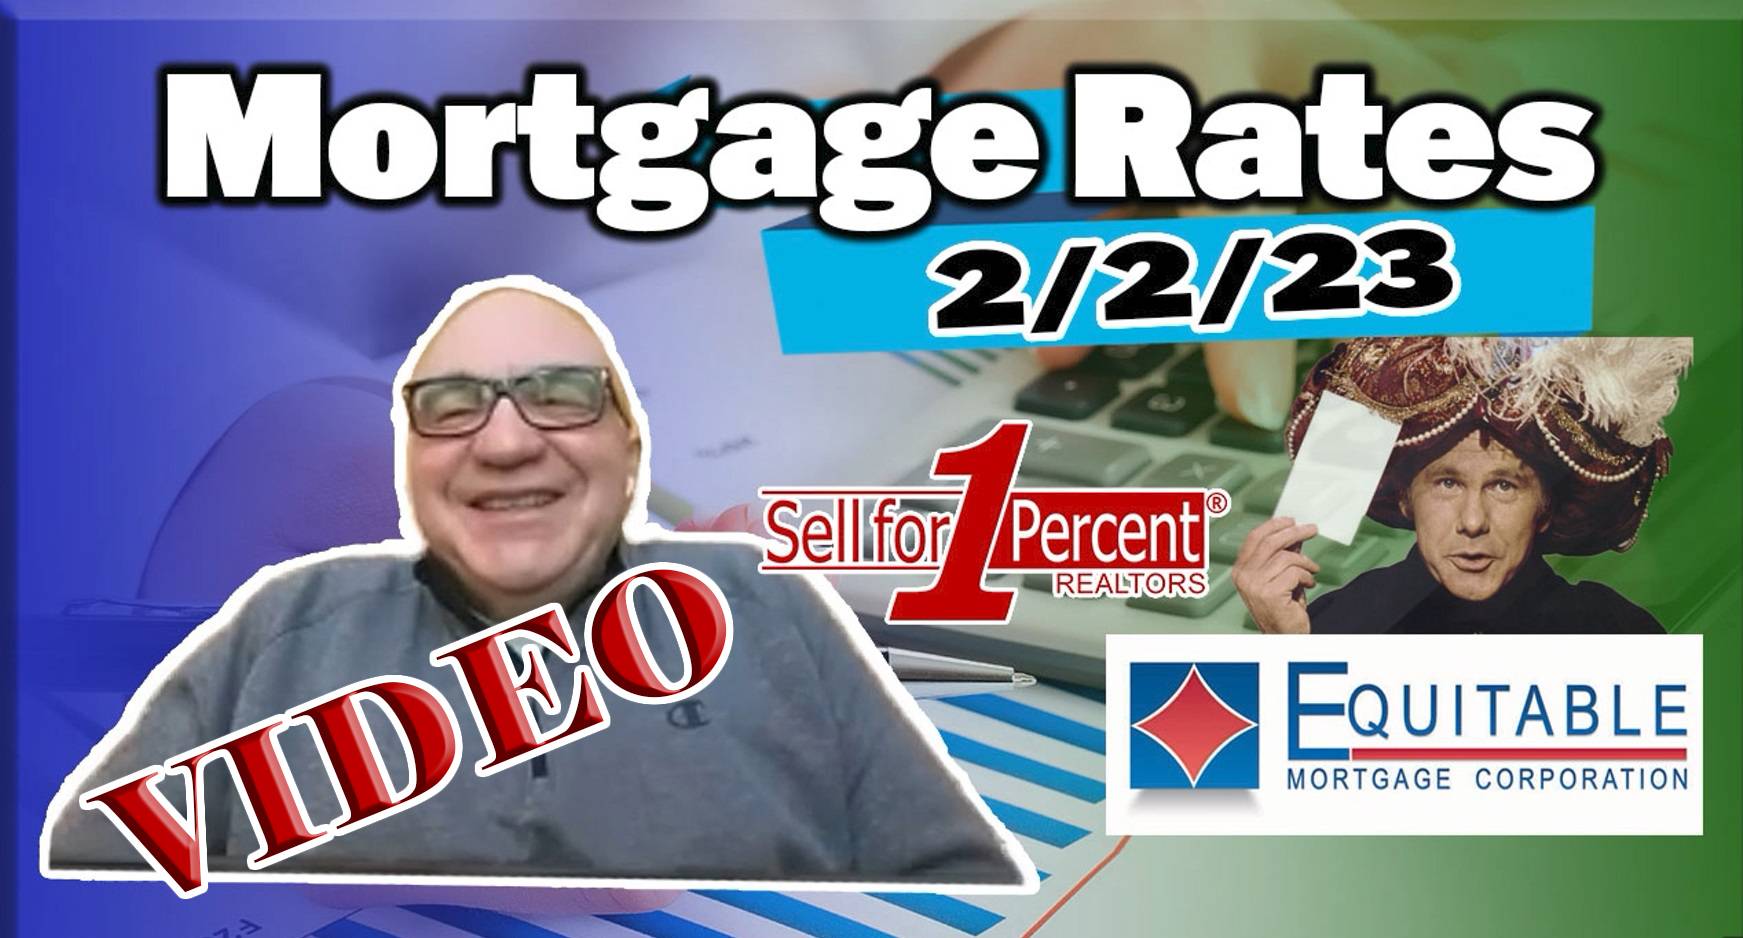 get caught up on todays mortgage rates and how they effect you! call us for more information (614) 451-6616